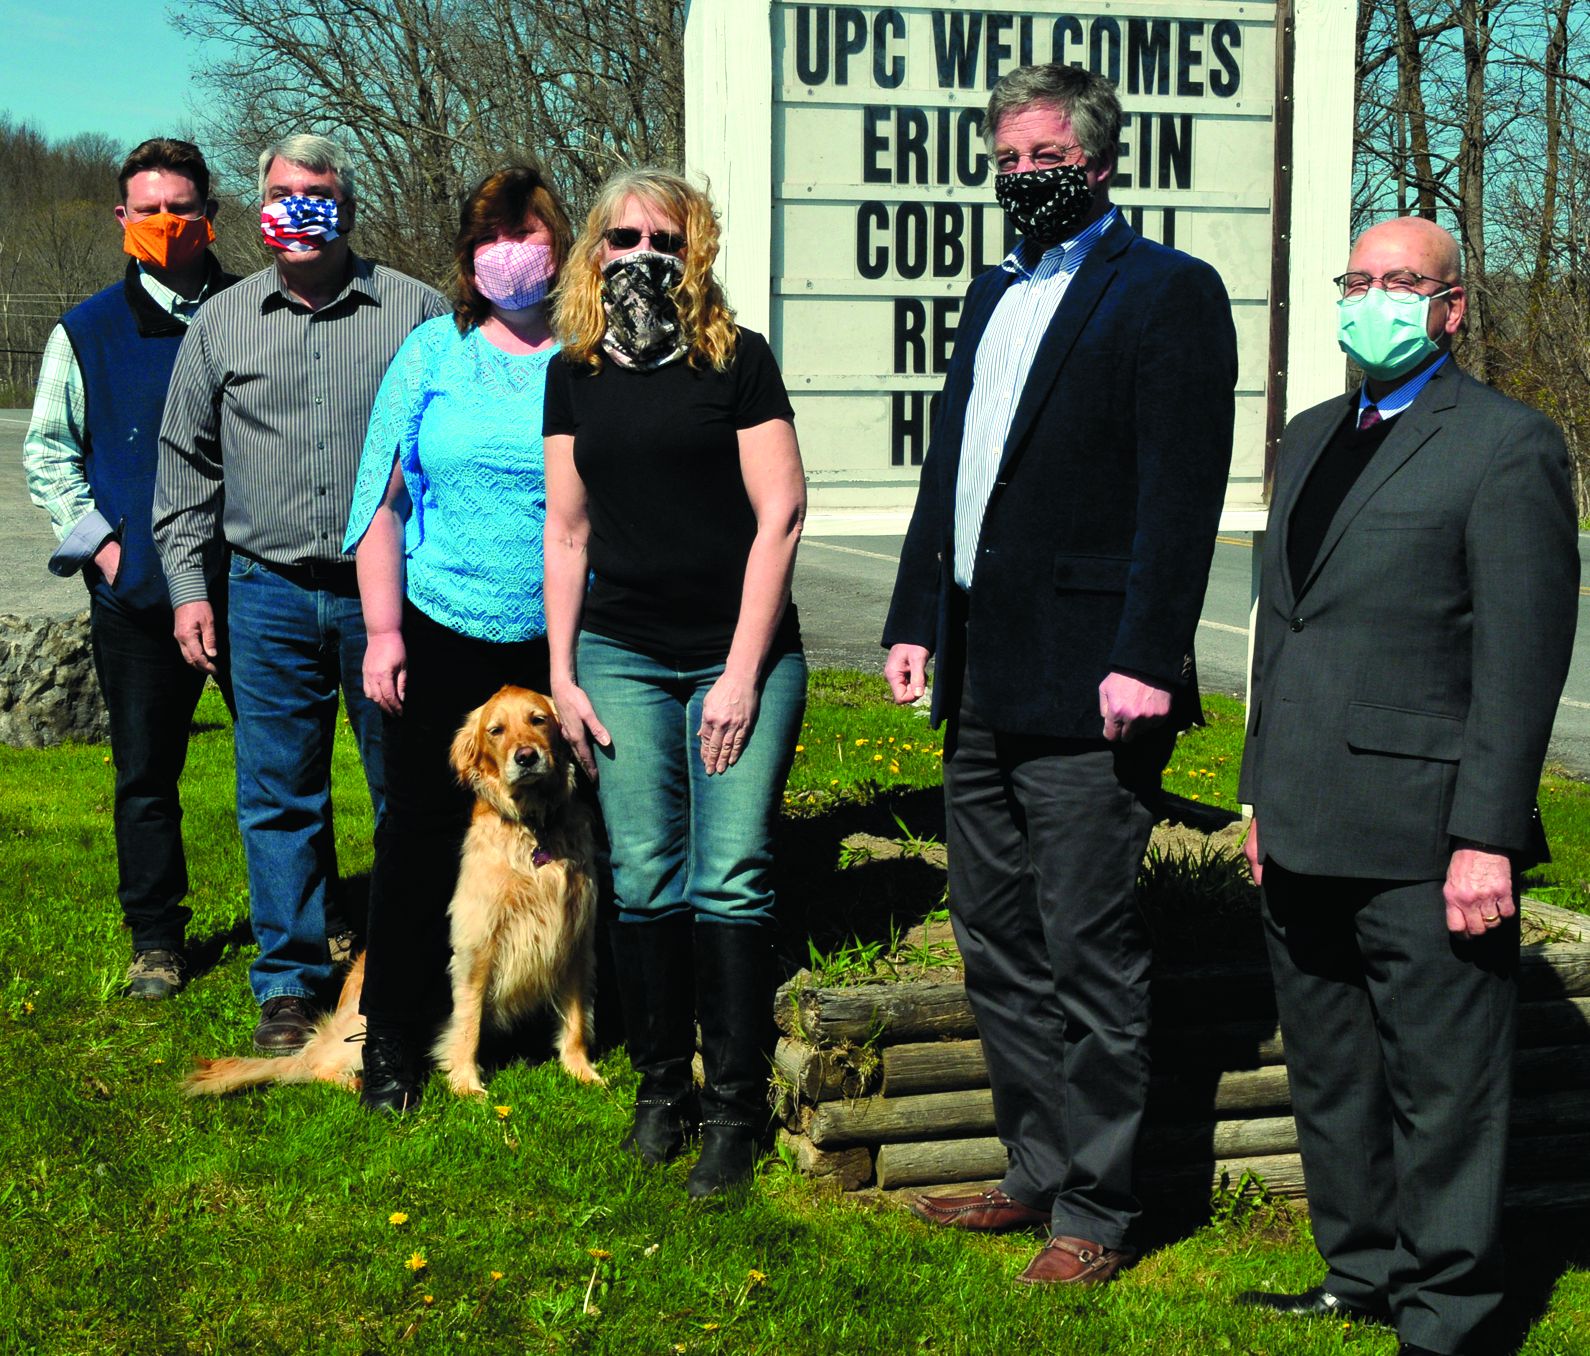 Universal Plastics pitches in with face shields